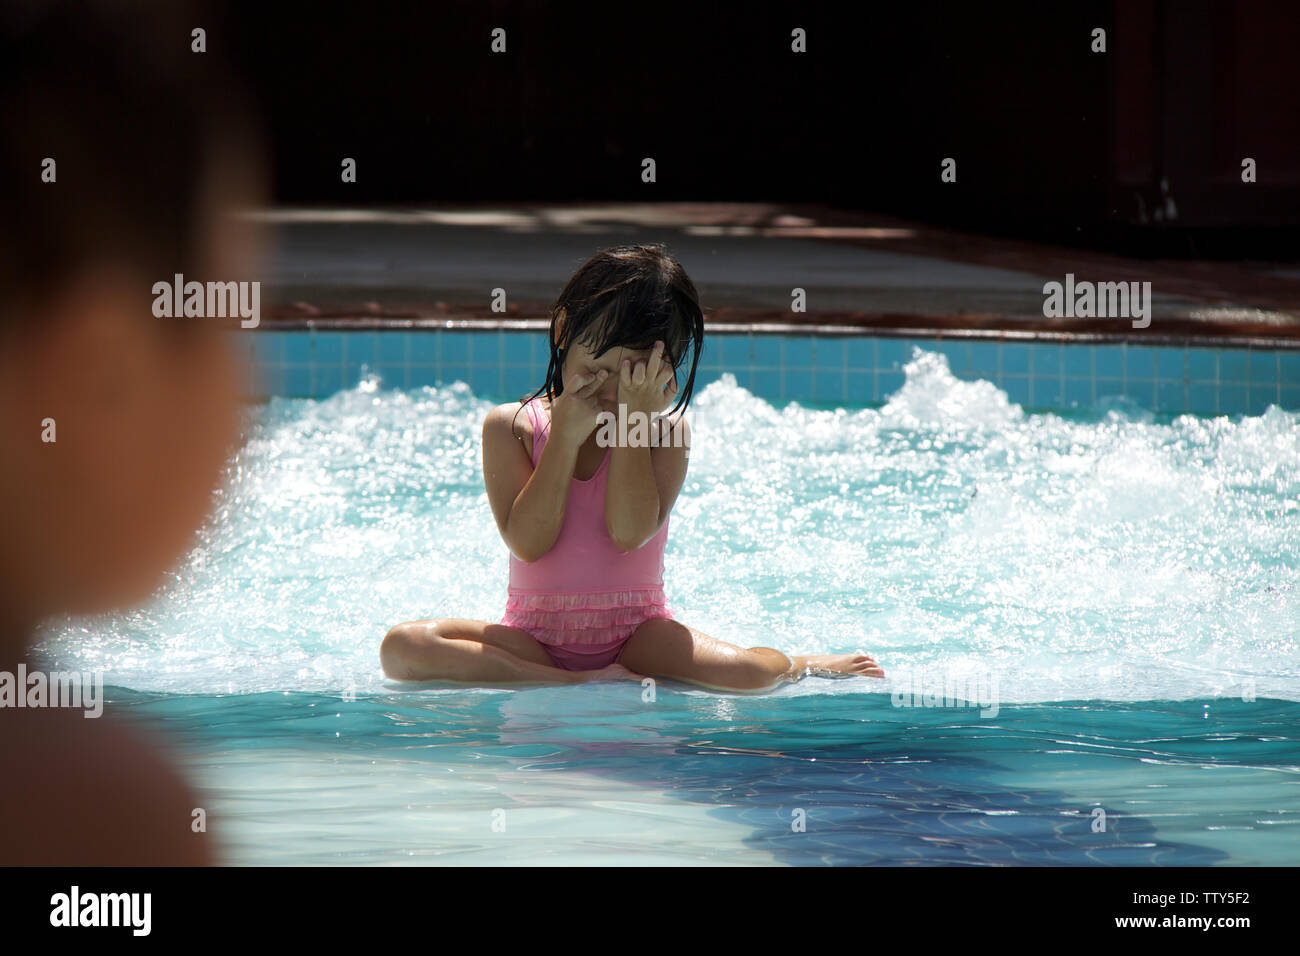 Girl playing in a swimming pool Stock Photo